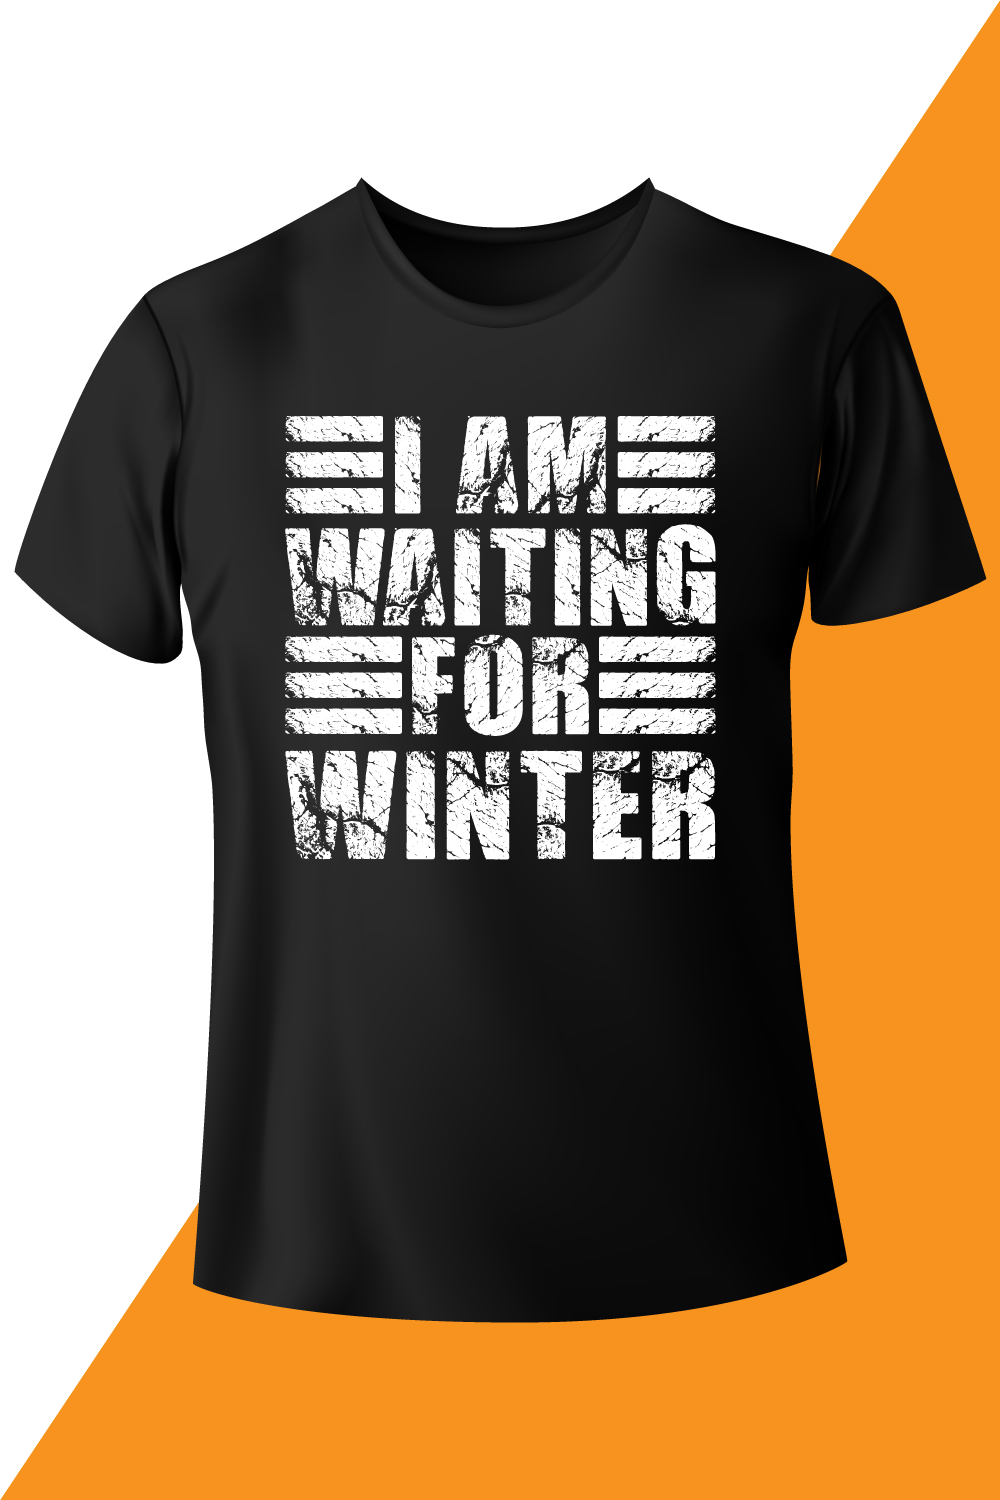 An image with a black t-shirt with an enchanting inscription i am waiting for winter.